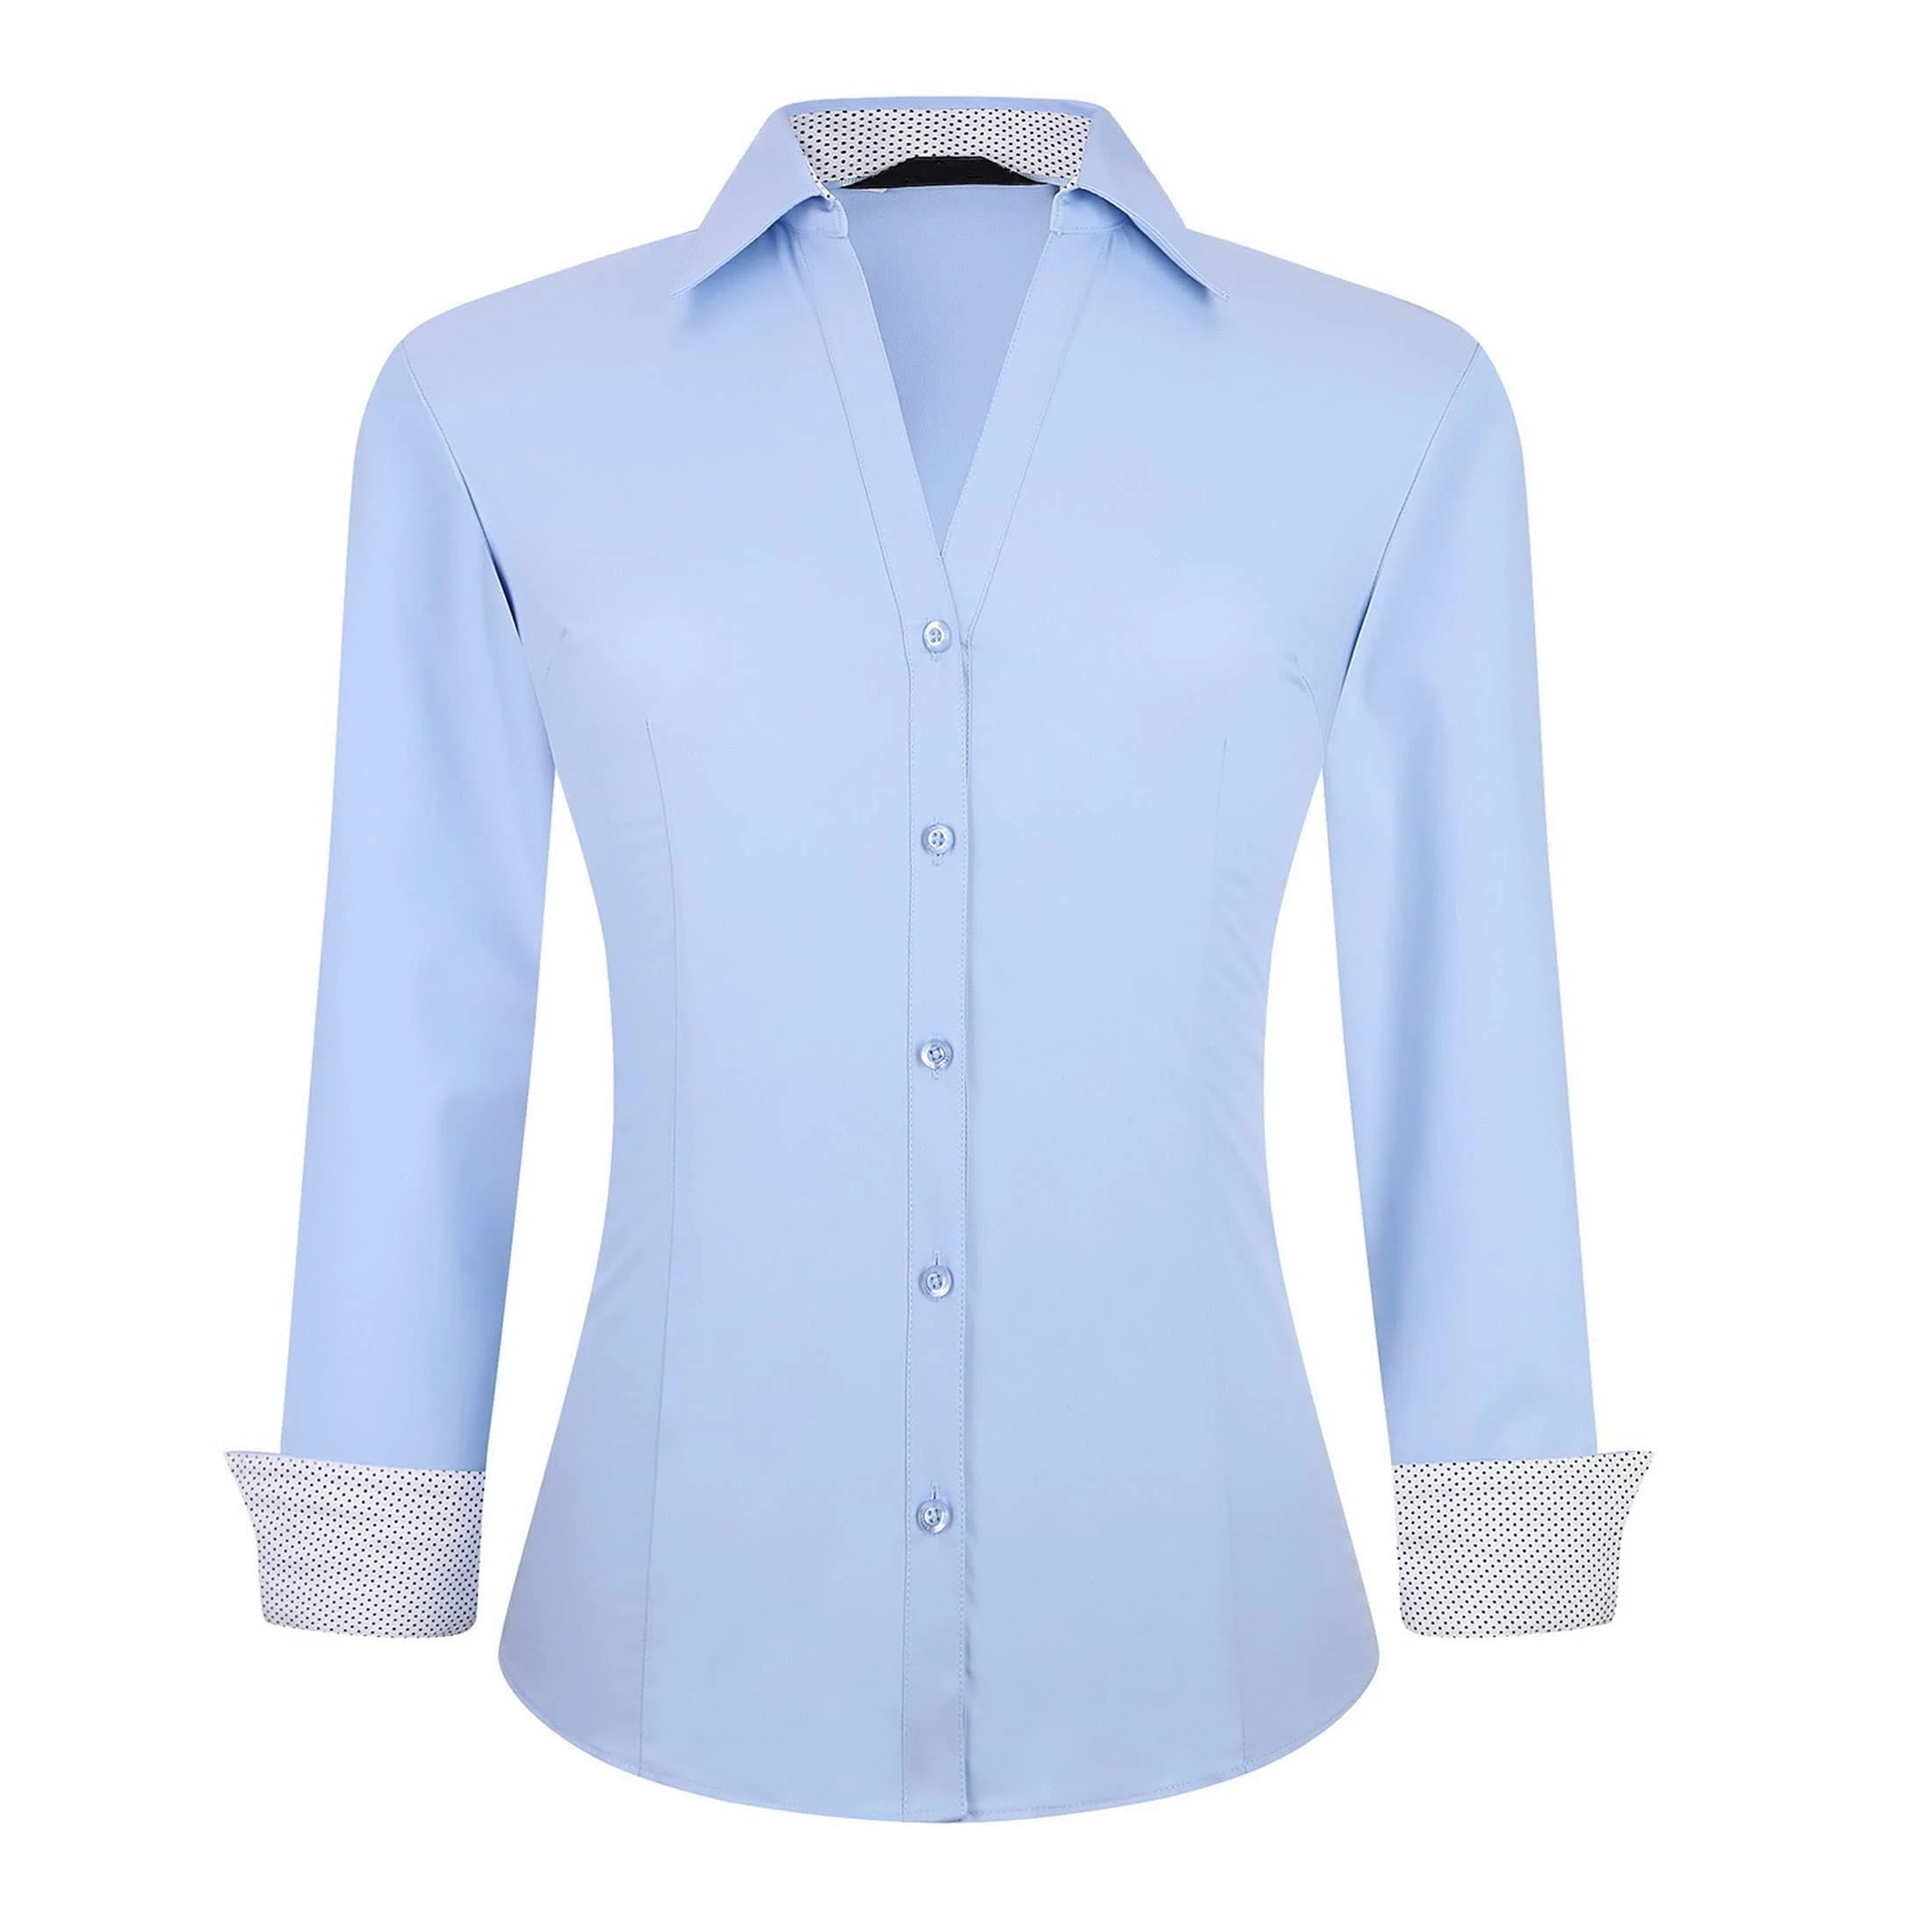 Comfortable Stretchy V-Neck Work Shirt for Women | Image